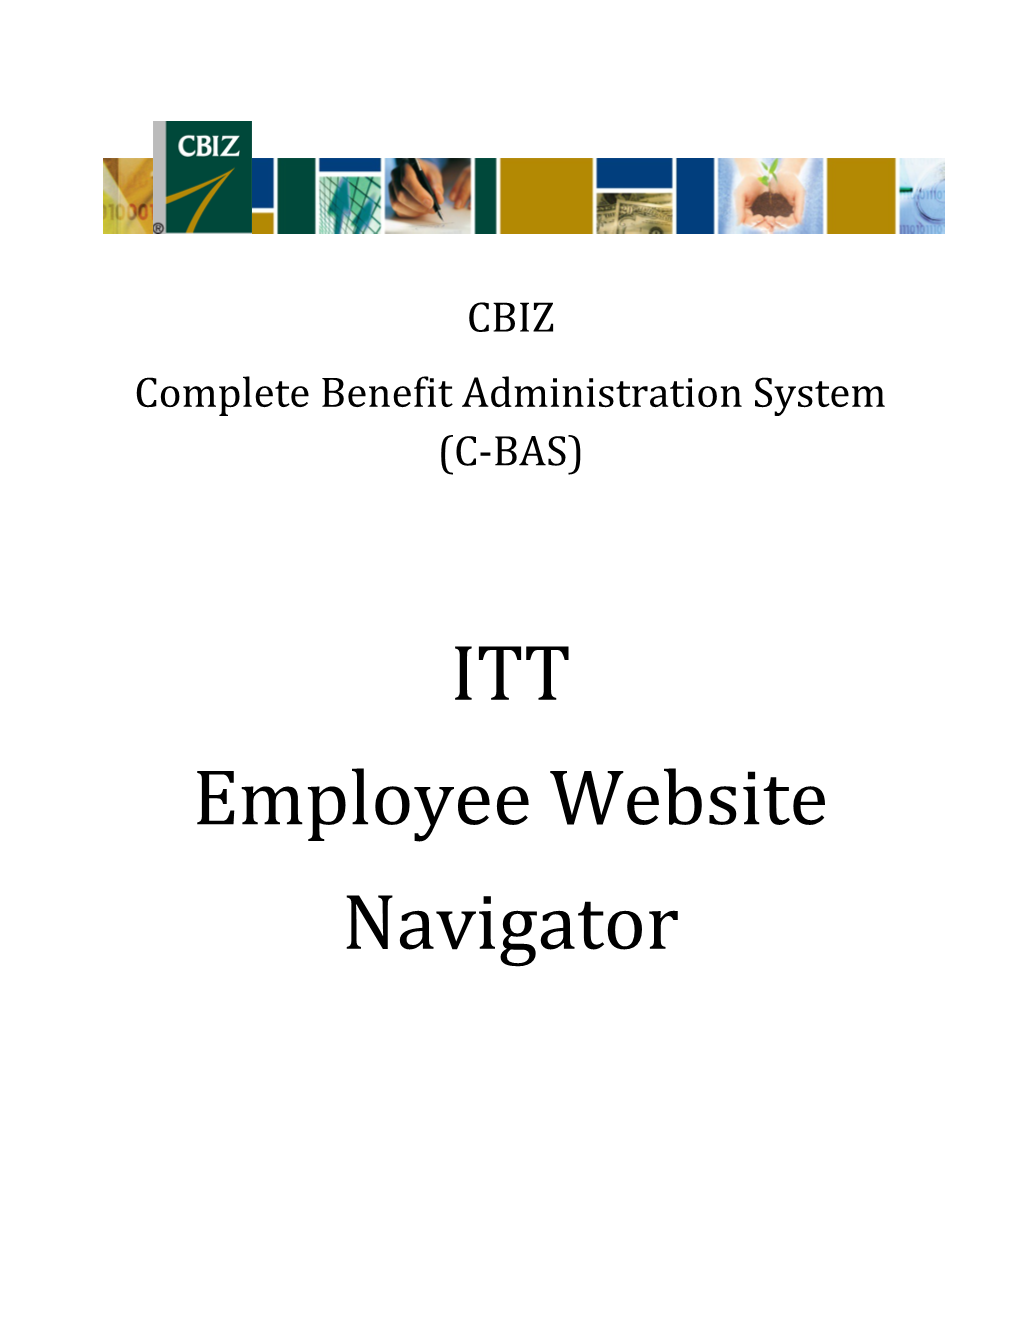 Complete Benefit Administration System (C-BAS)